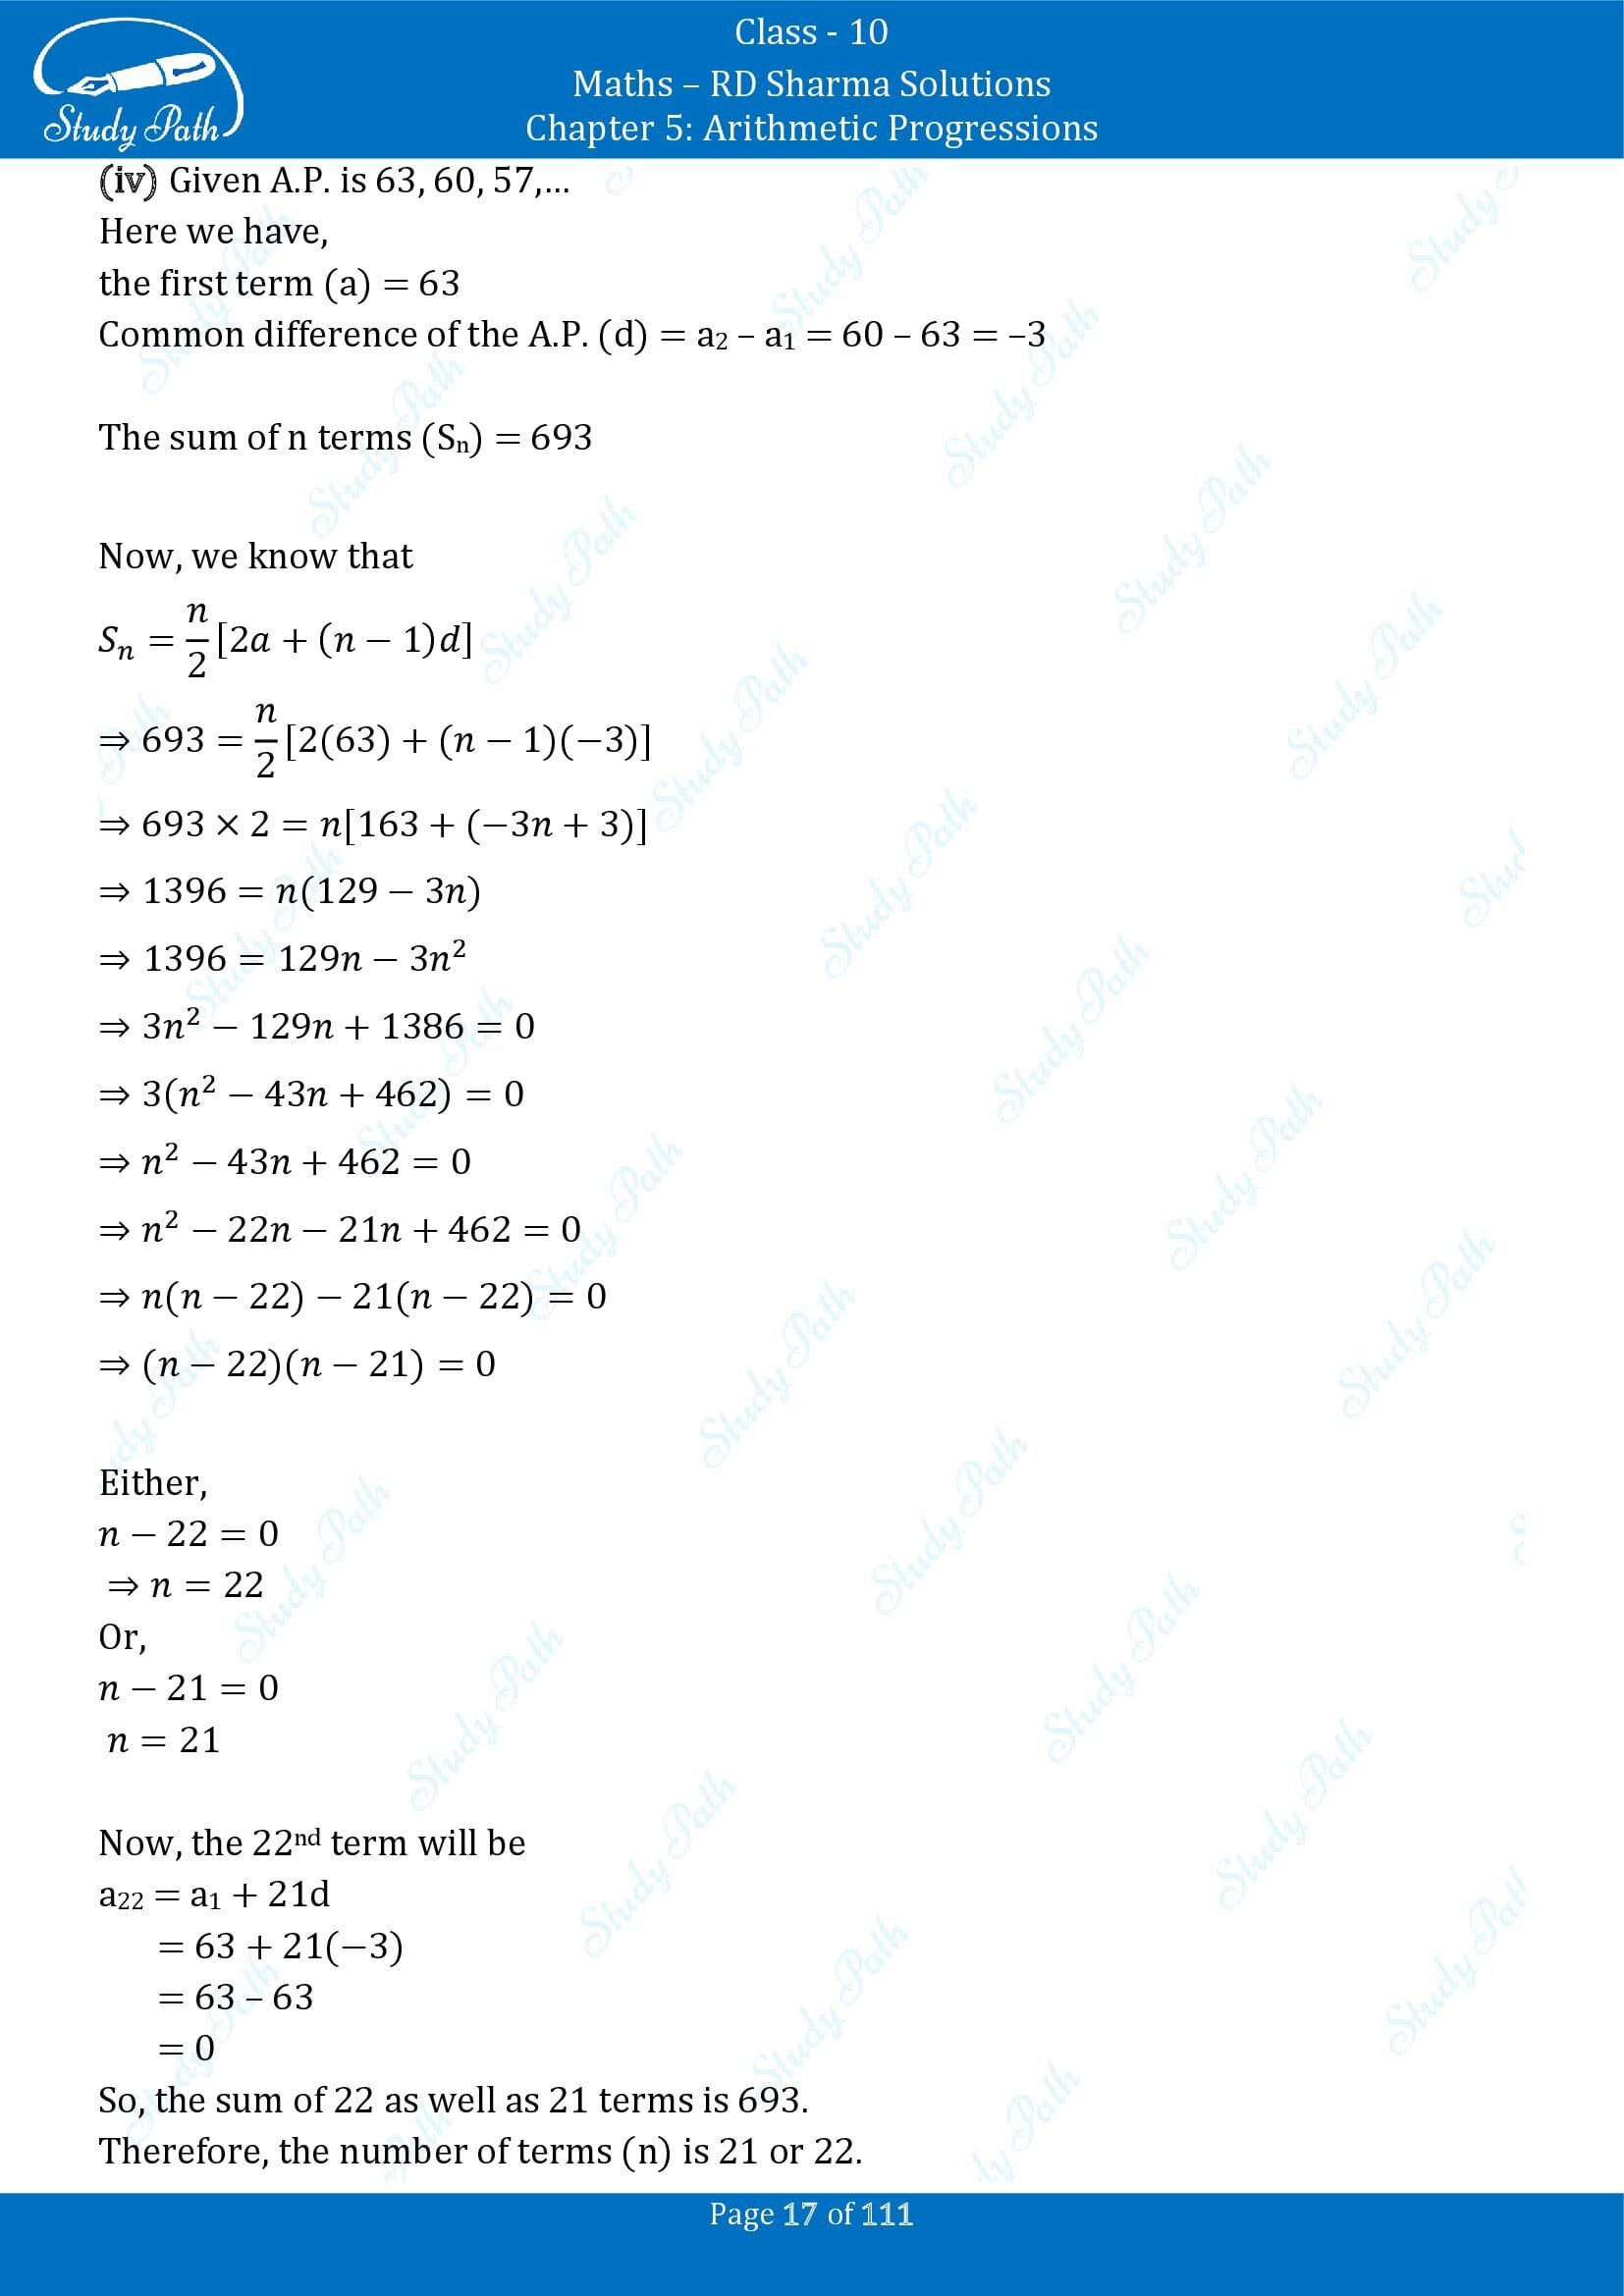 RD Sharma Solutions Class 10 Chapter 5 Arithmetic Progressions Exercise 5.6 00017